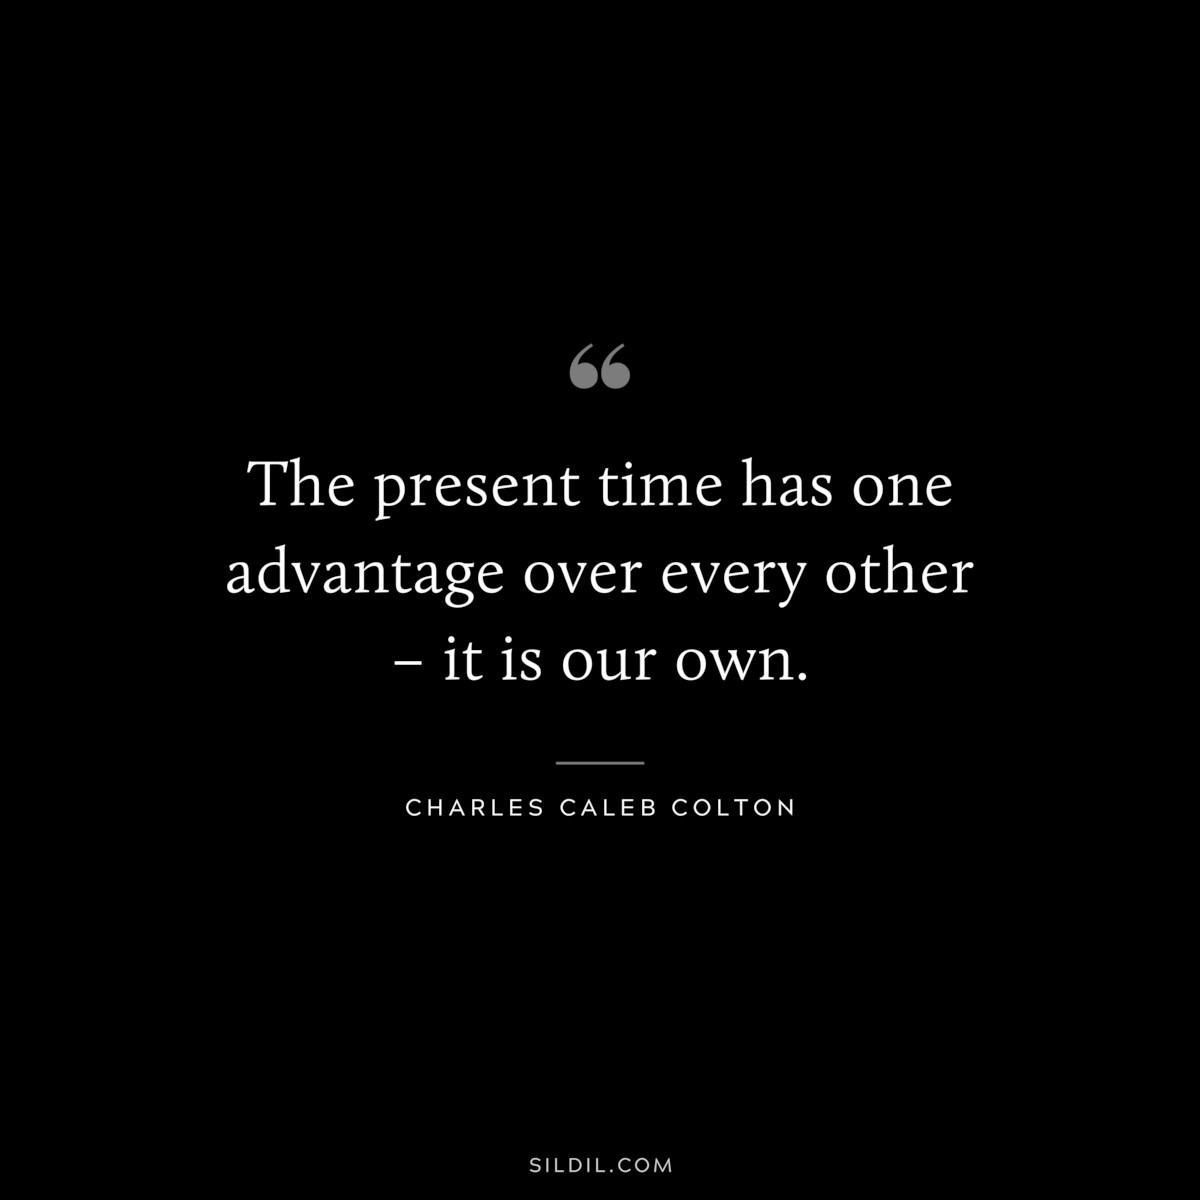 The present time has one advantage over every other – it is our own. ― Charles Caleb Colton